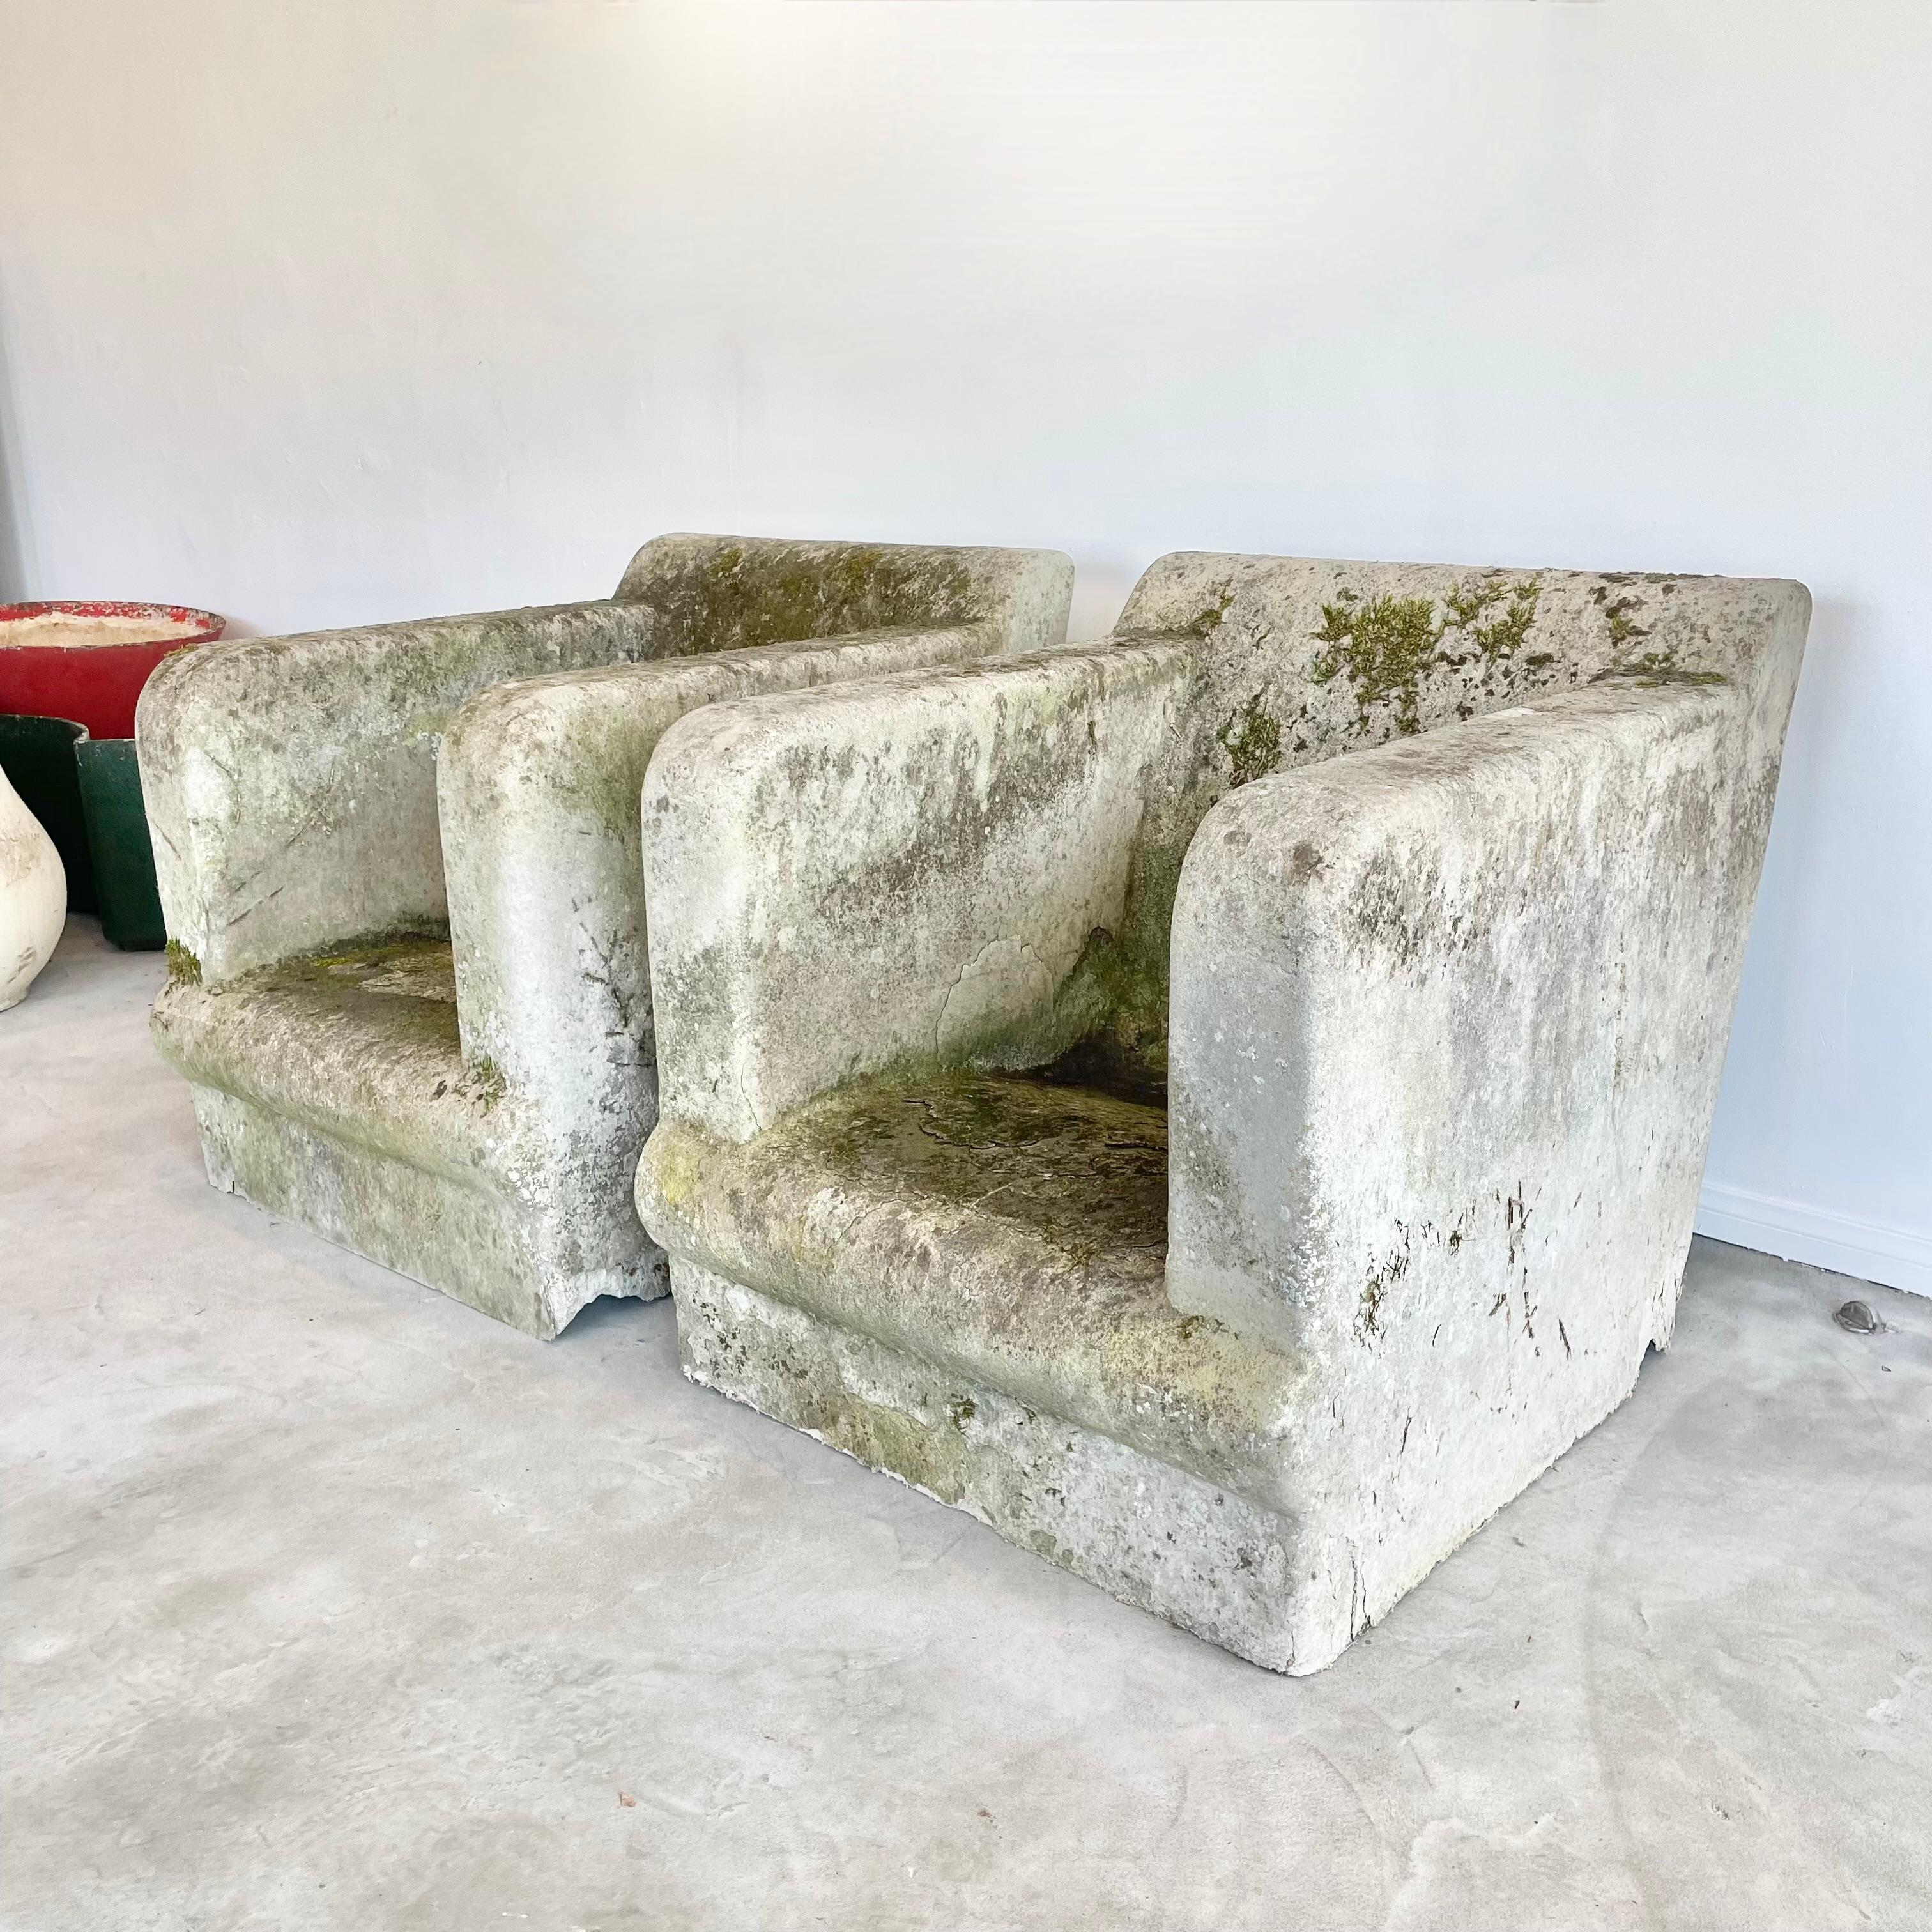 Stunning and extremely rare pair of sculptural outdoor chairs made of concrete. Hand made in the 1940s in Belgium. Club chair design with a hollow body and perfect patina including vines, lichen and moss. Incredible modern design with great